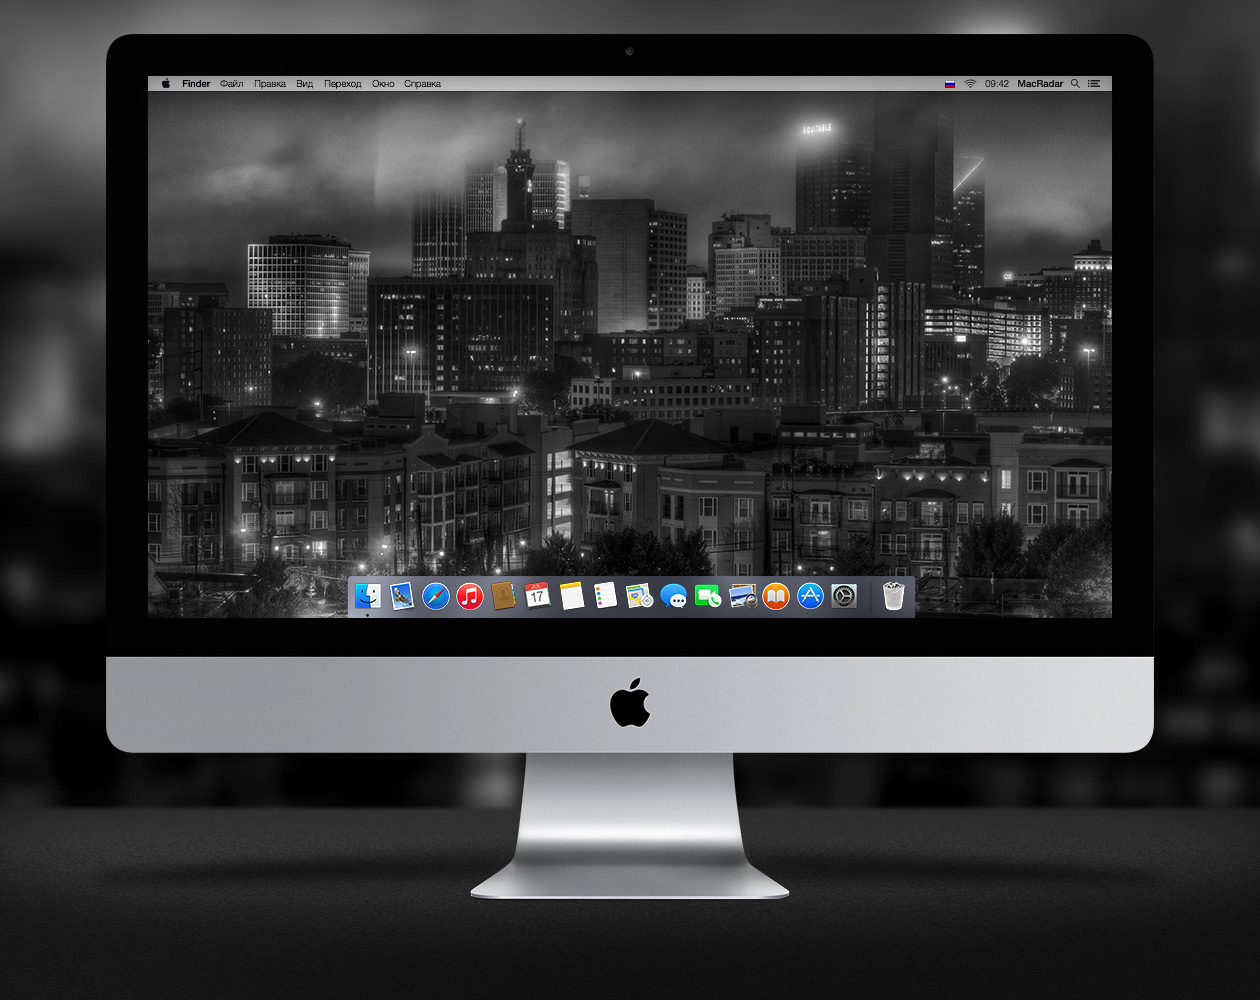 Imac retina display wallpapers for iphone edel clutch